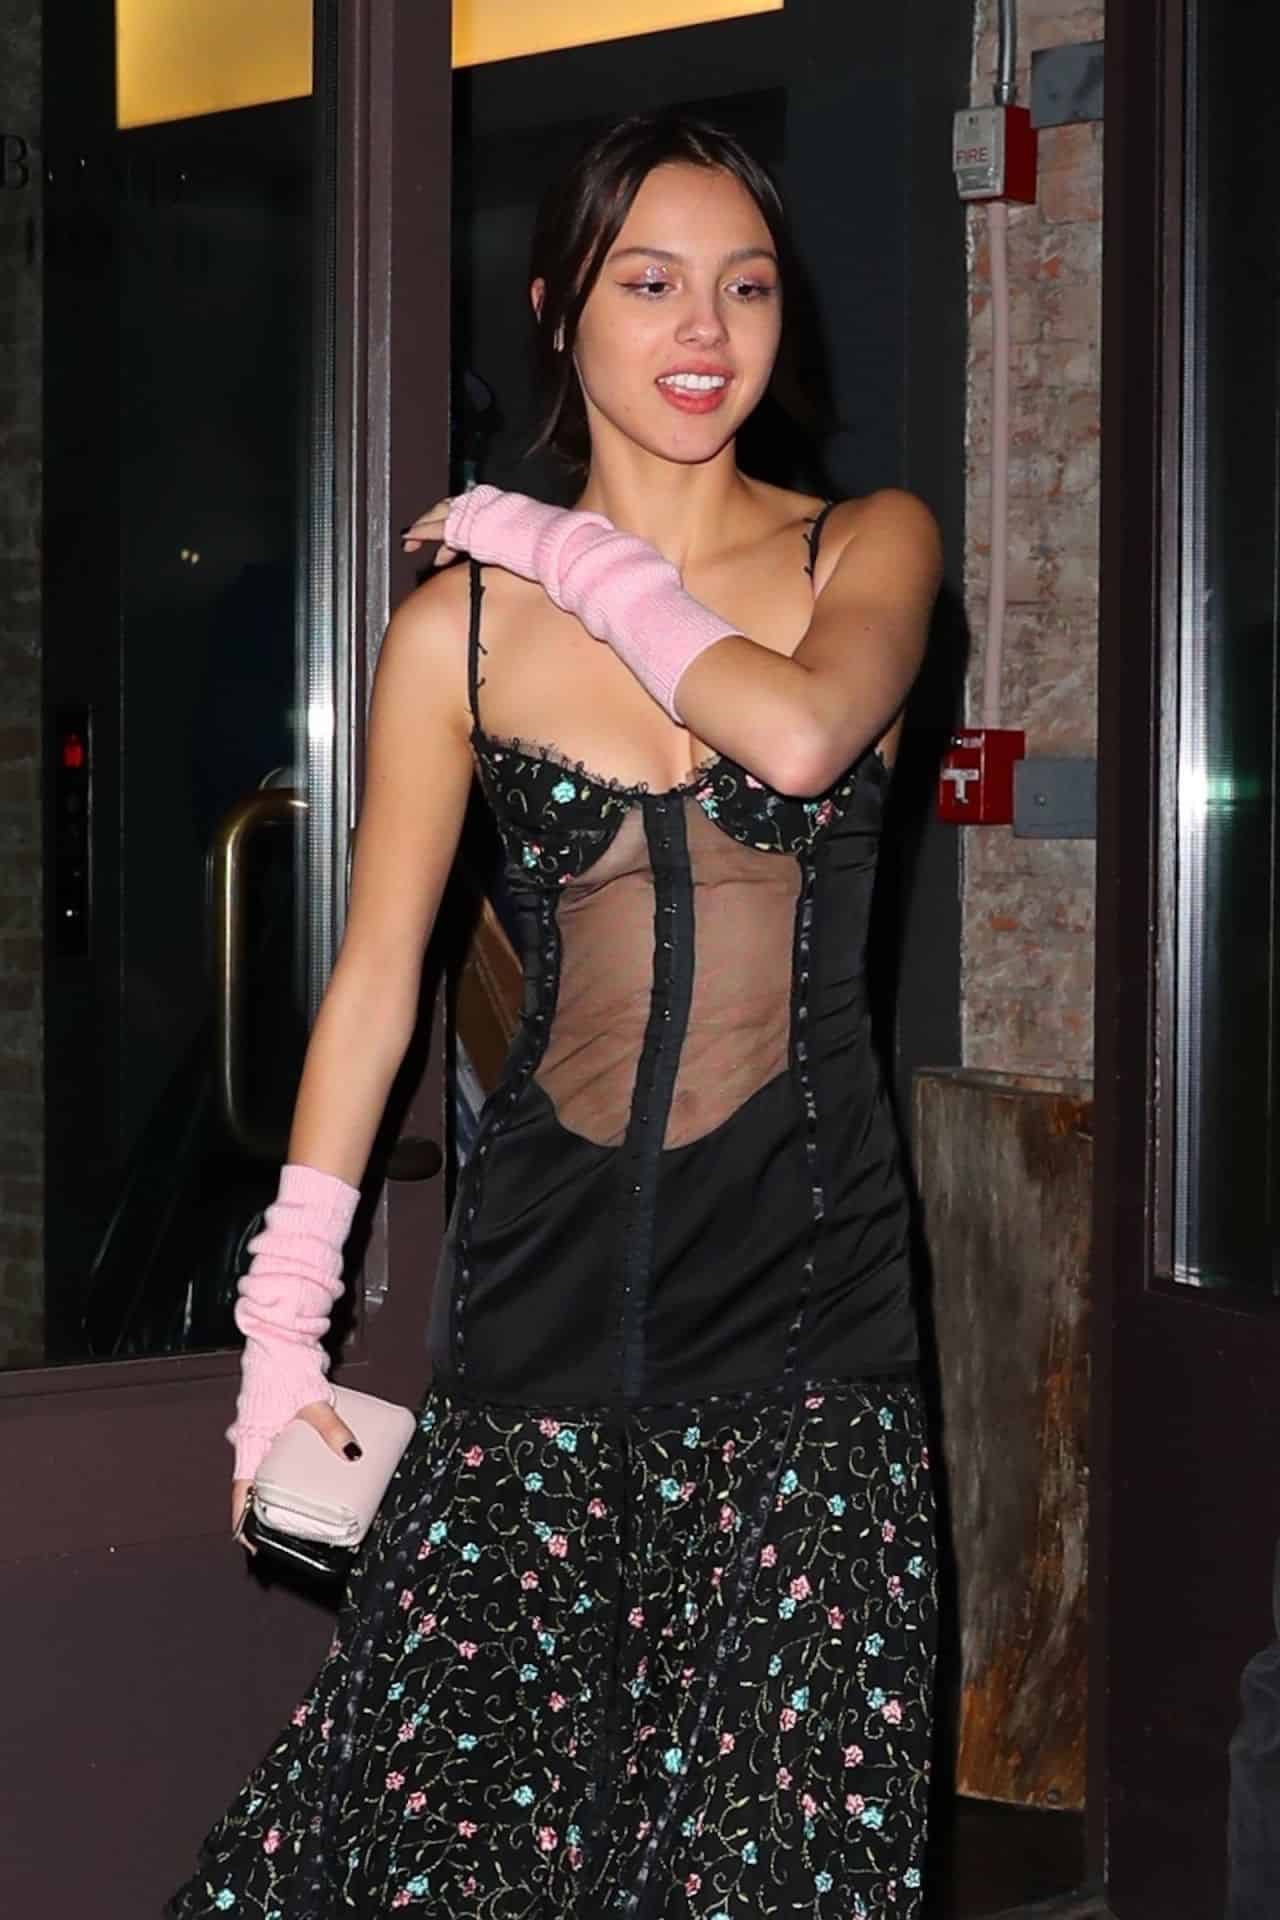 Best Victoria Justice Puts On A Busty Display In A Racy Mesh Top At The Homecoming Weekend Super Bowl Bash